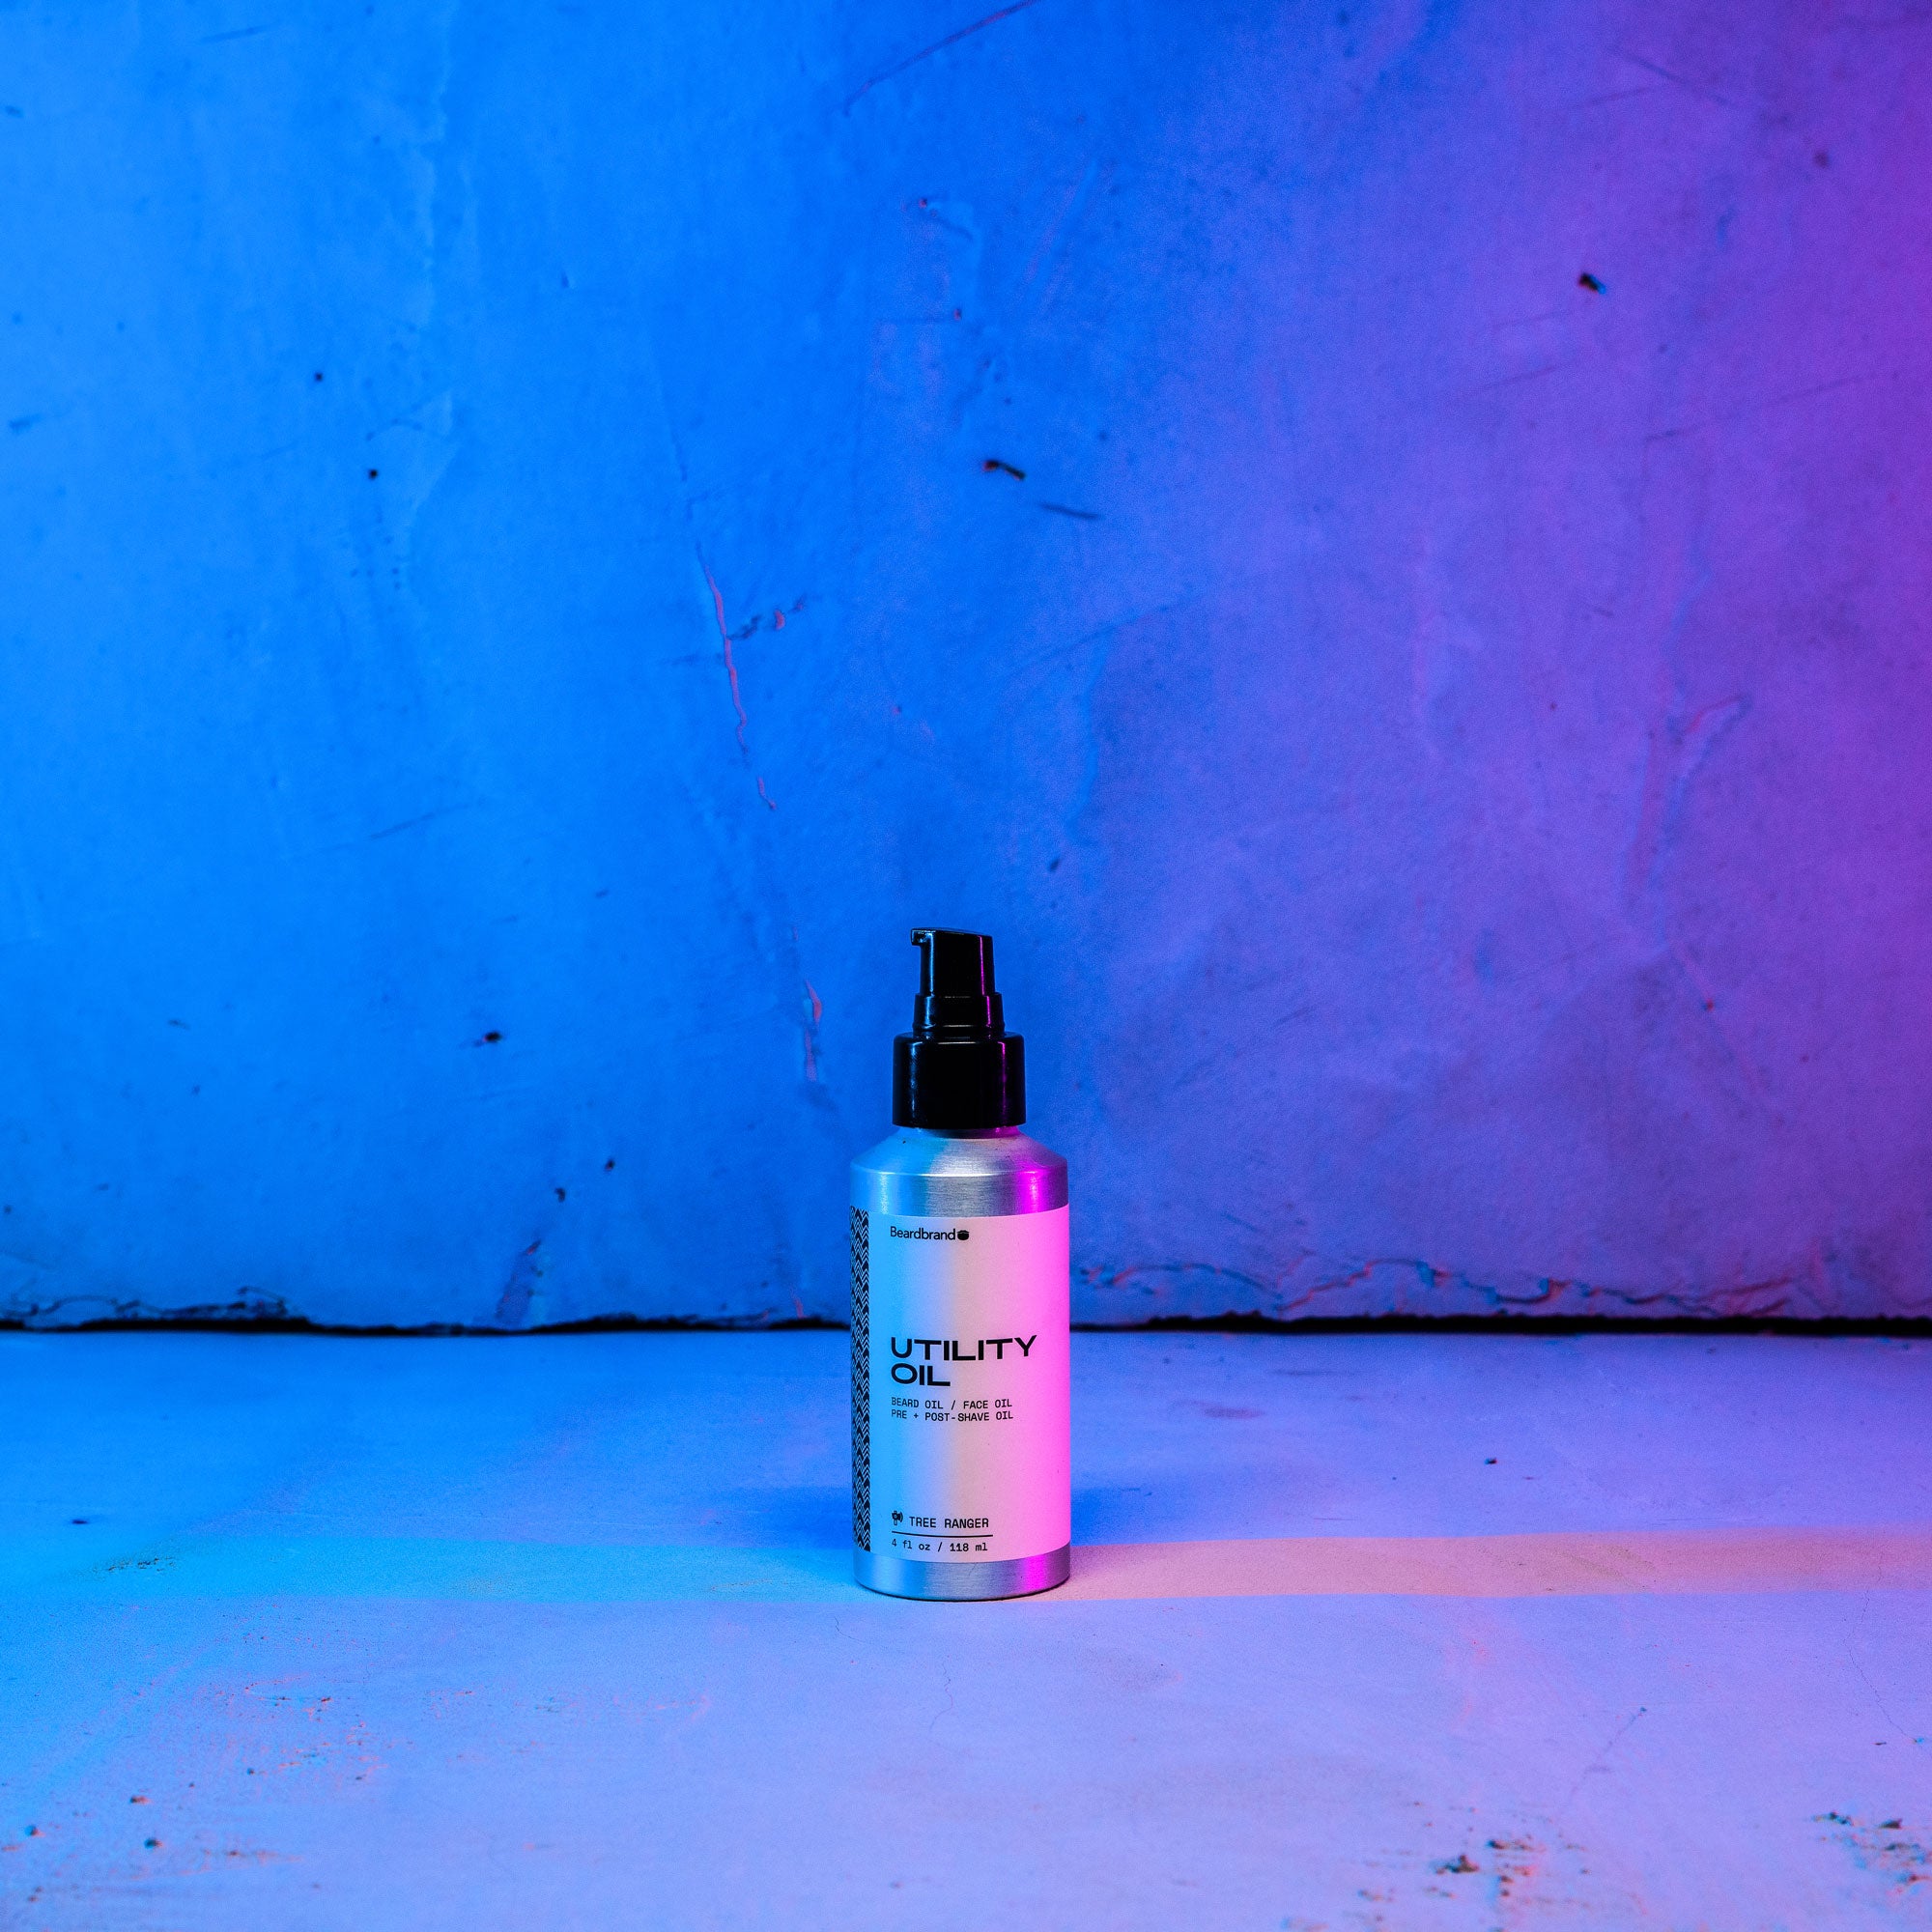 Beardbrand's Utility Oil set on a concrete backdrop highlighted in blue and pink lighting with the label facing forward.